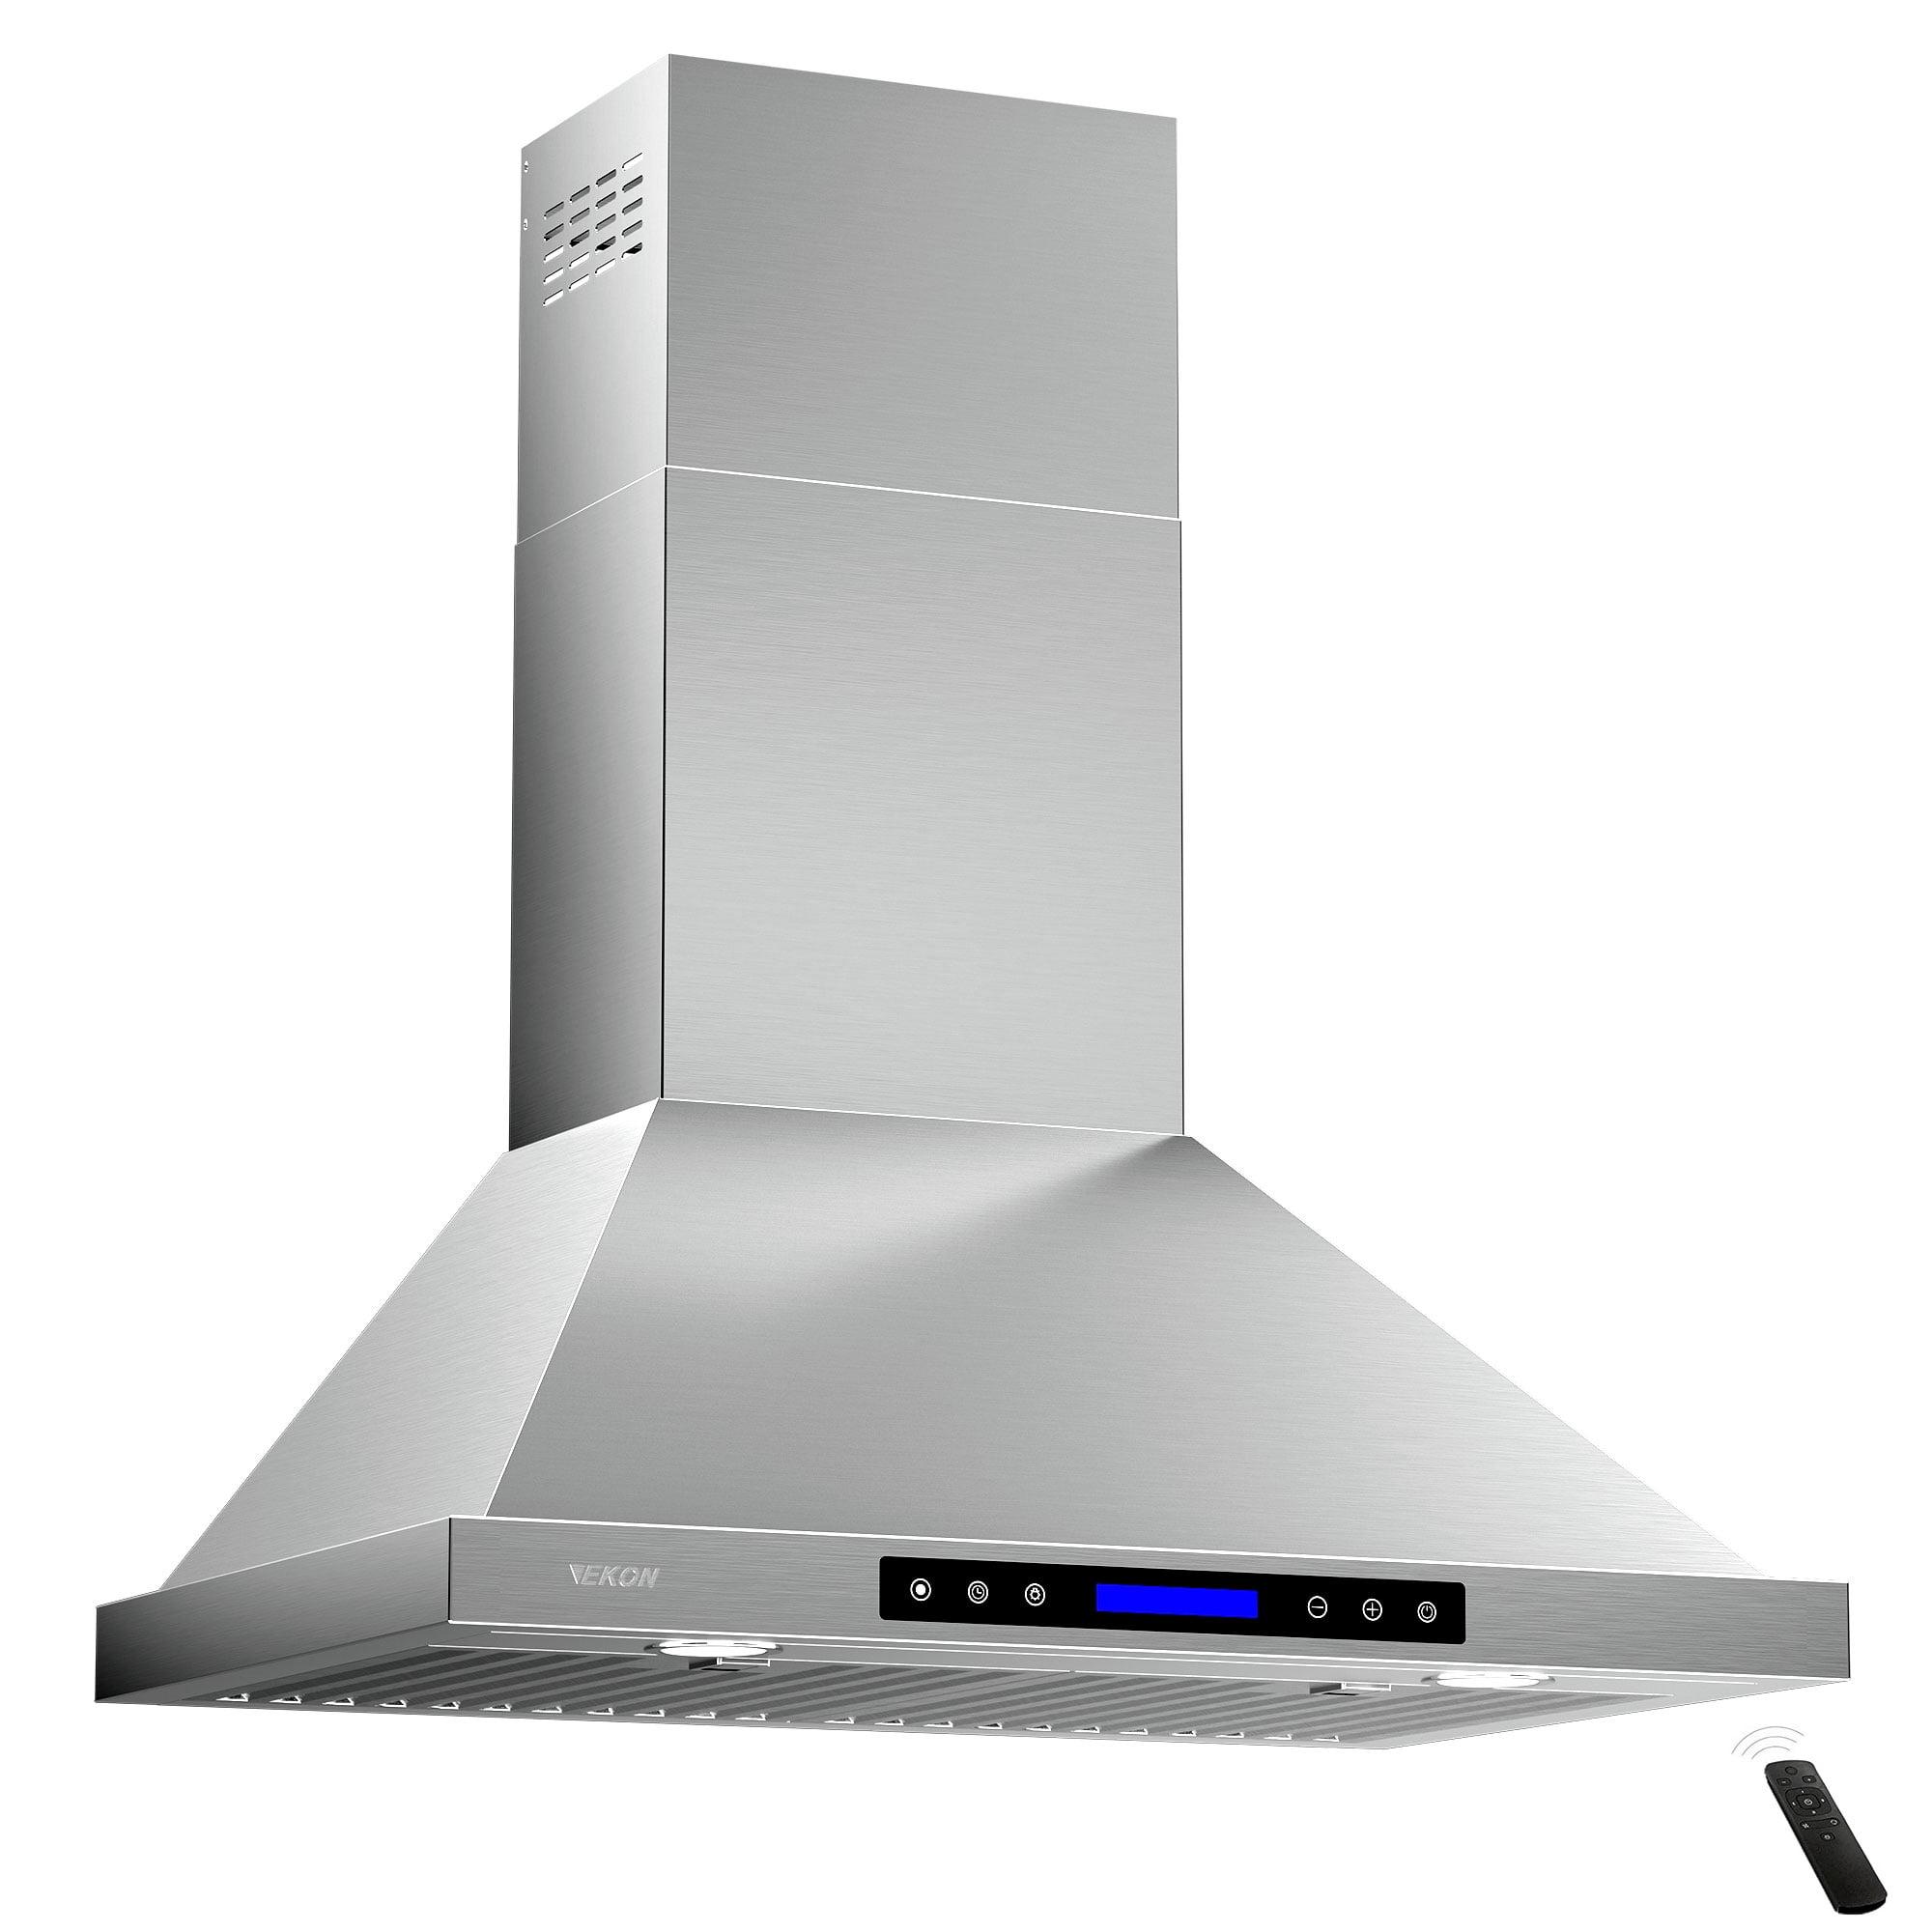 Fotile Perimeter Vent Series 36-Inch 1000 CFM Wall Mount Range Hood with  LED light and Touchscreen in Stainless Steel (EMS9026)